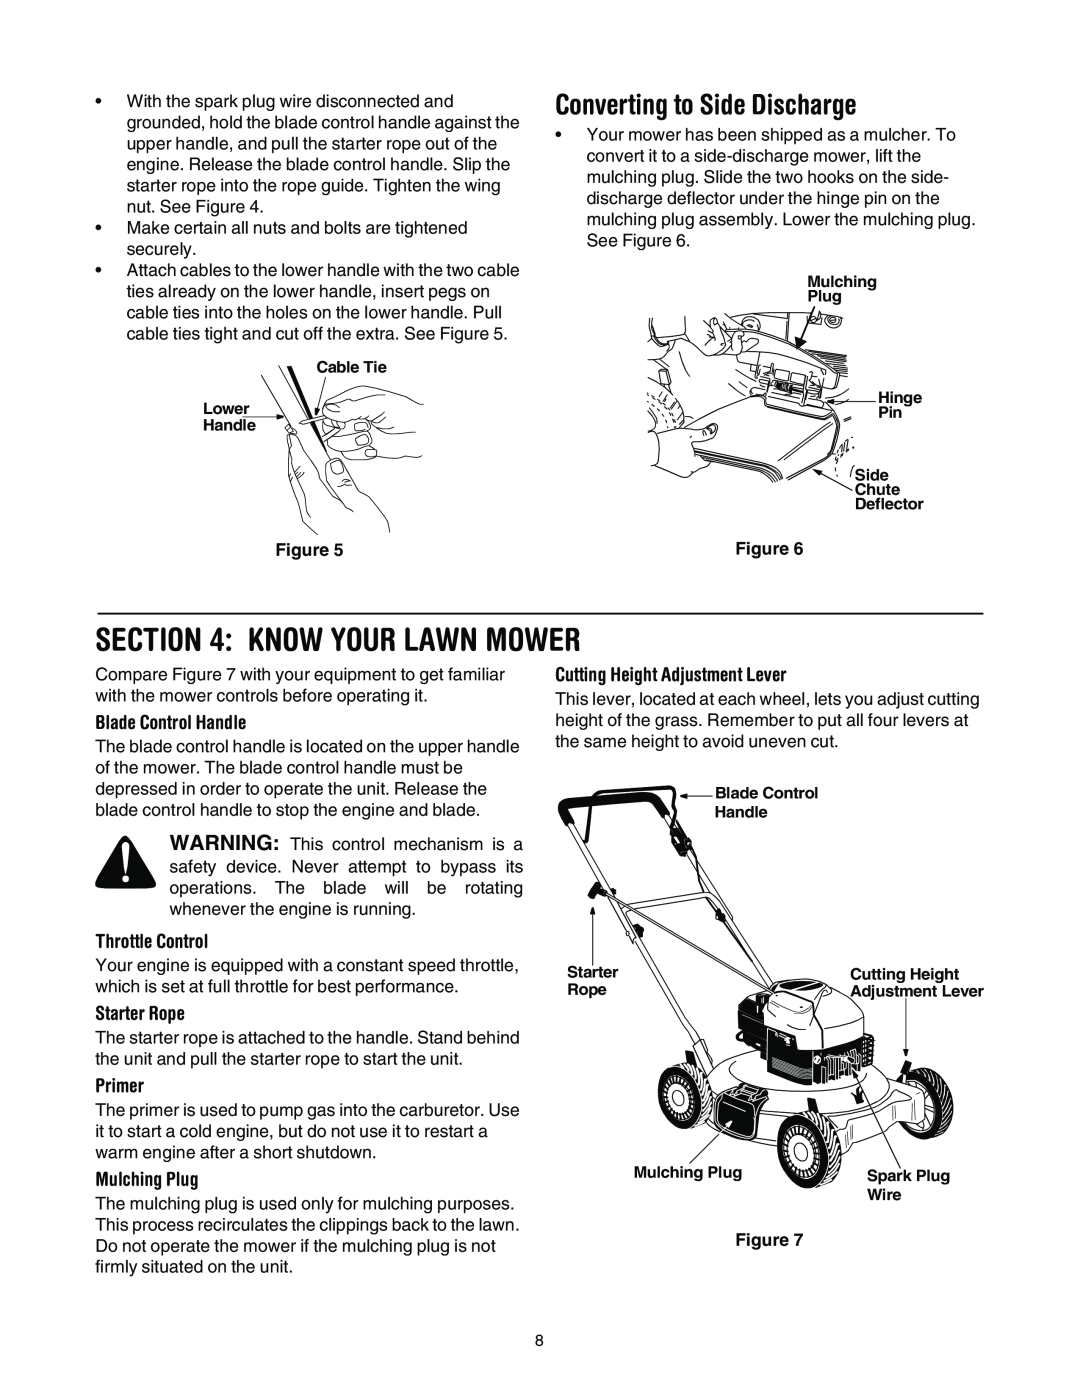 Yard-Man 107 Know Your Lawn Mower, Converting to Side Discharge, Blade Control Handle, Throttle Control, Starter Rope 